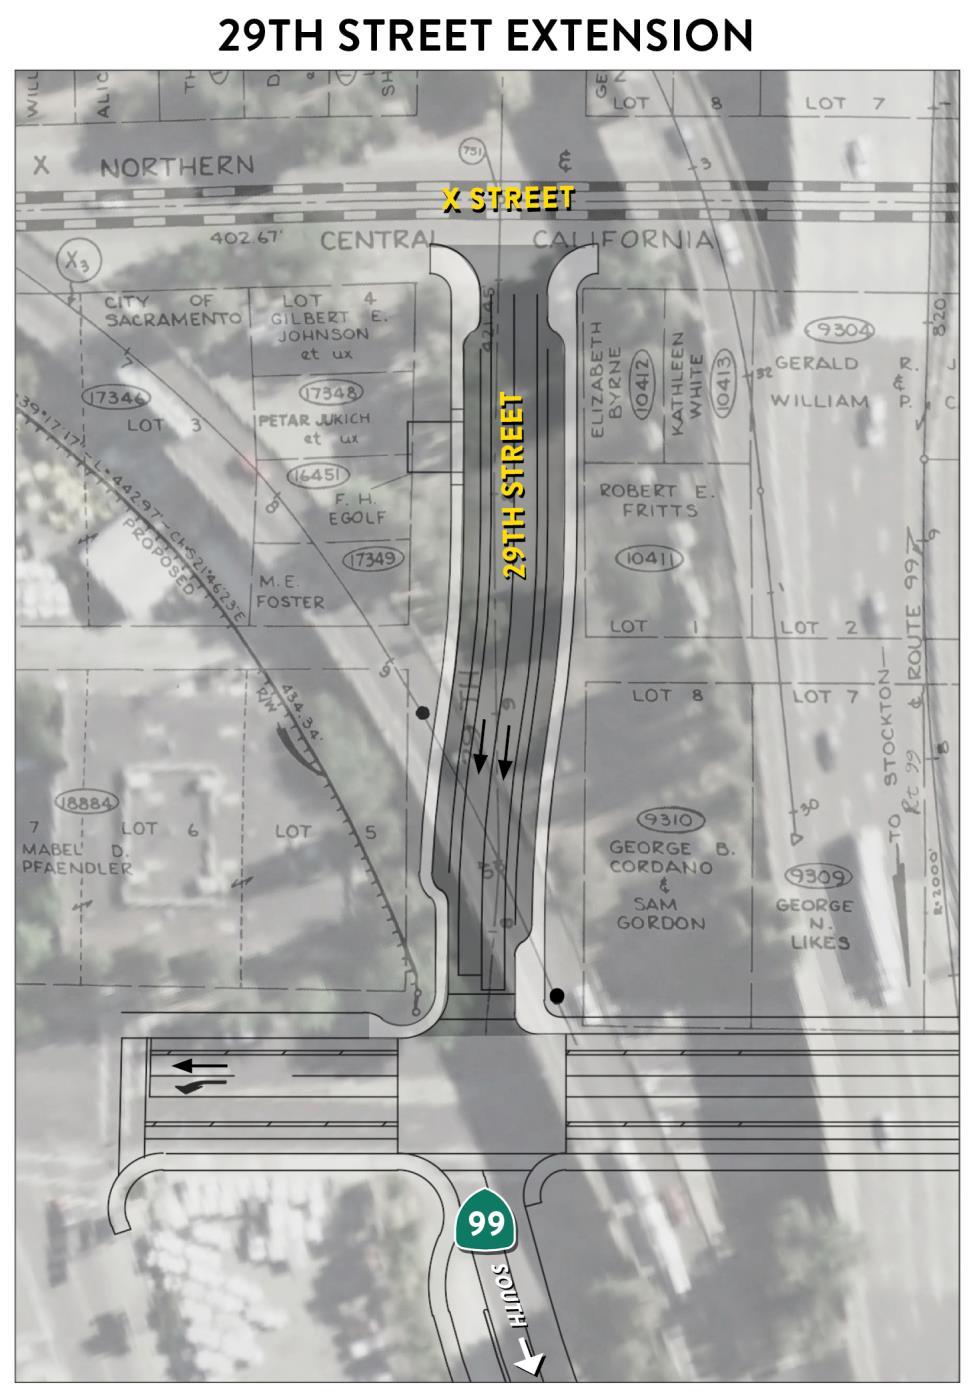 Proposed Improvements 29 th Street Extension 2-lane, one-way roadway from X Street to